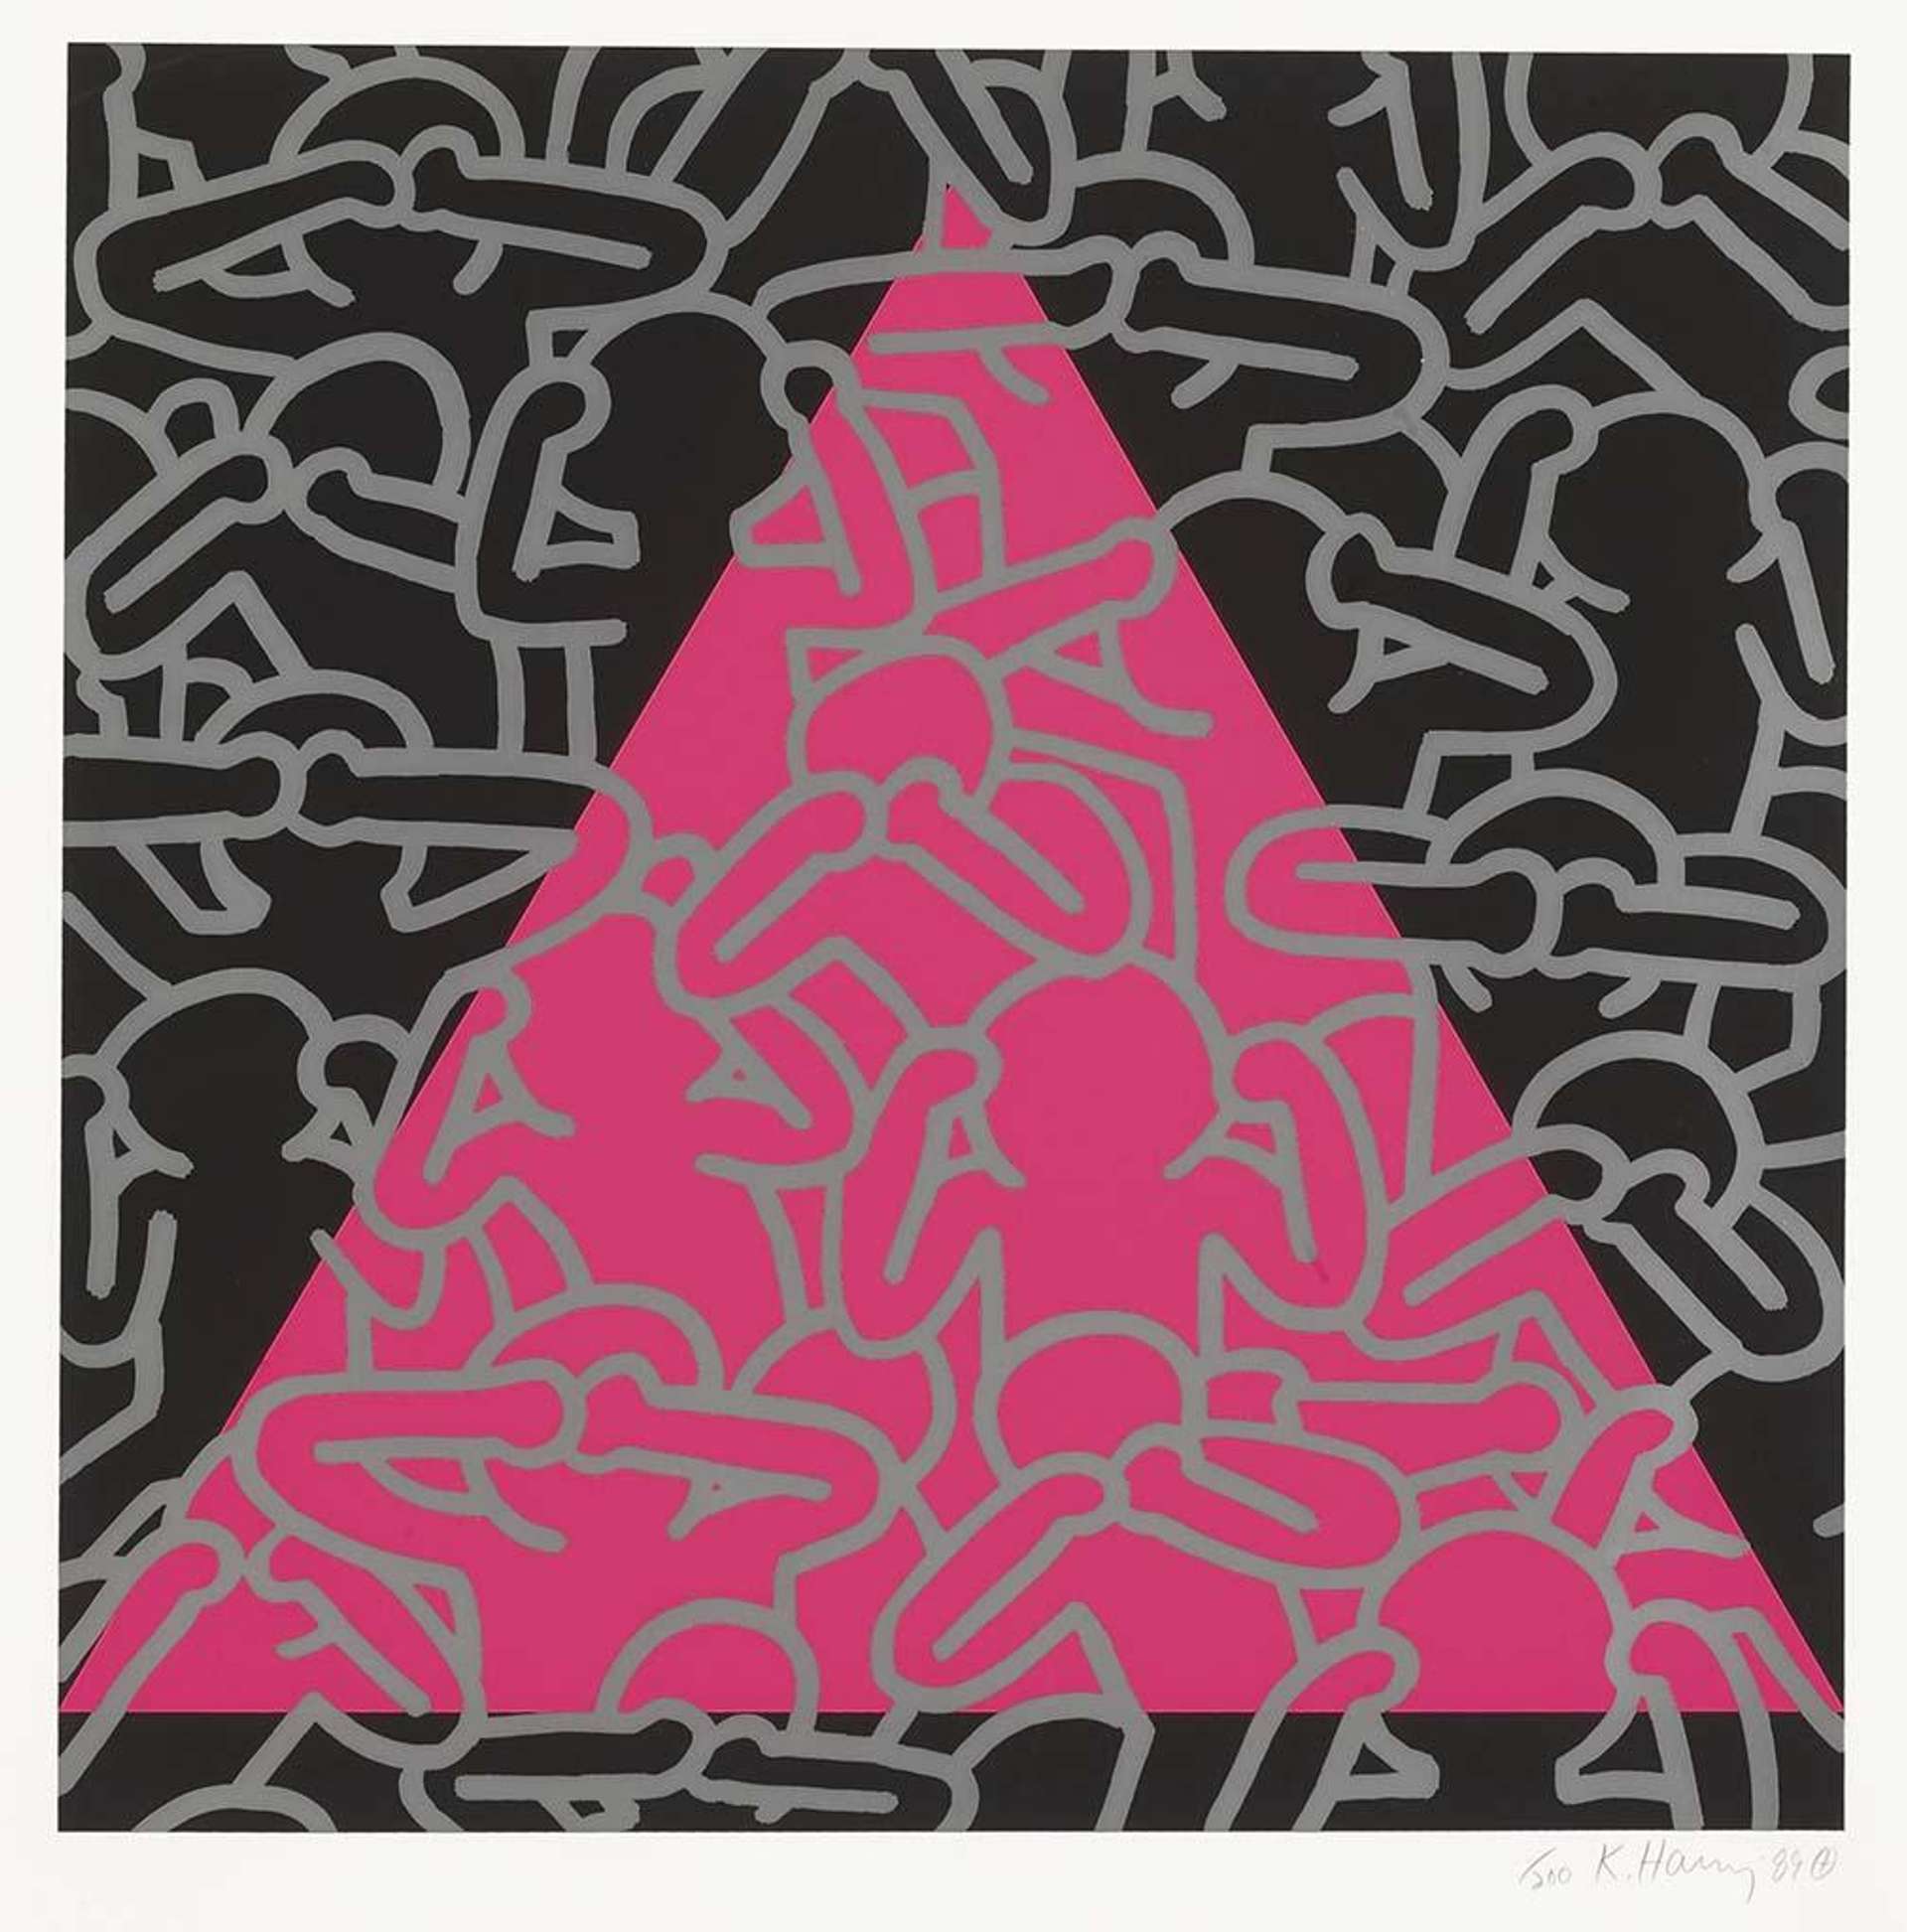 Silence Equals Death by Keith Haring